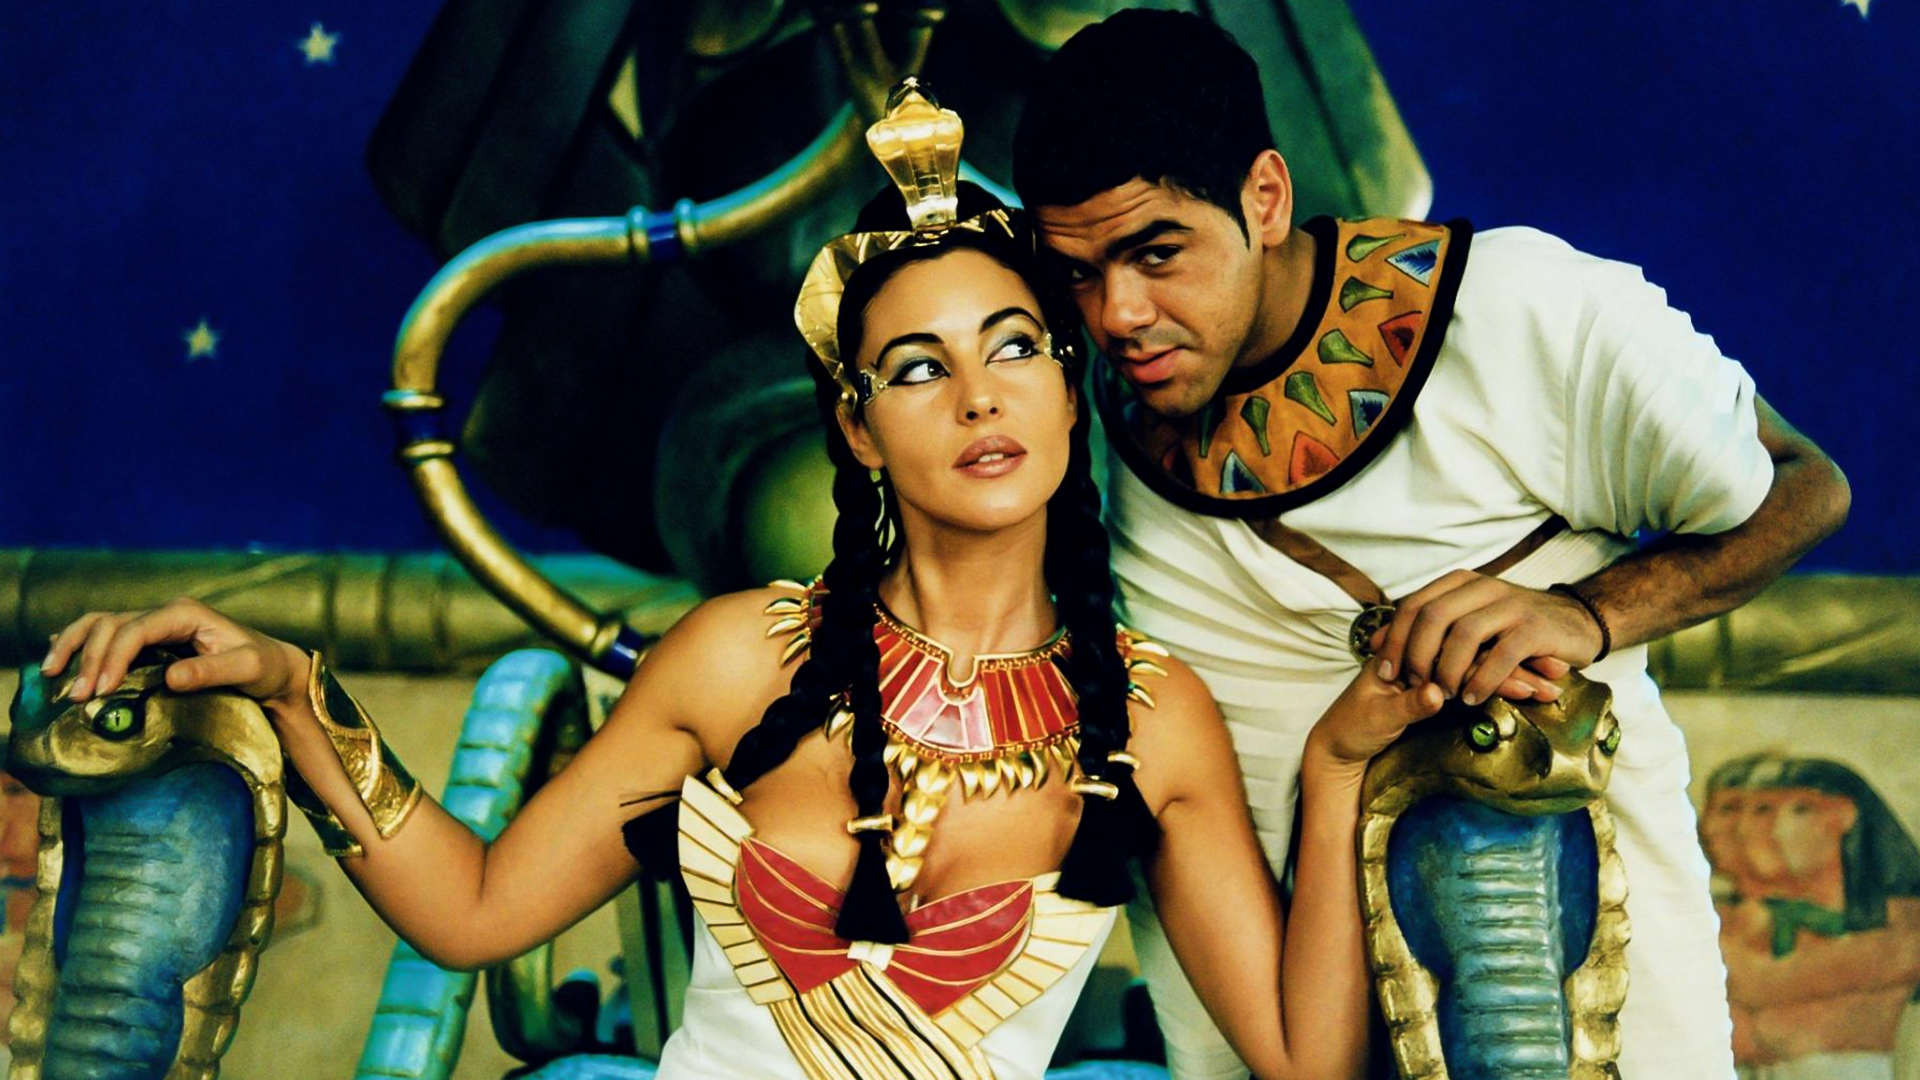 Movie Asterix & Obelix: Mission Cleopatra HD Wallpaper | Background Image